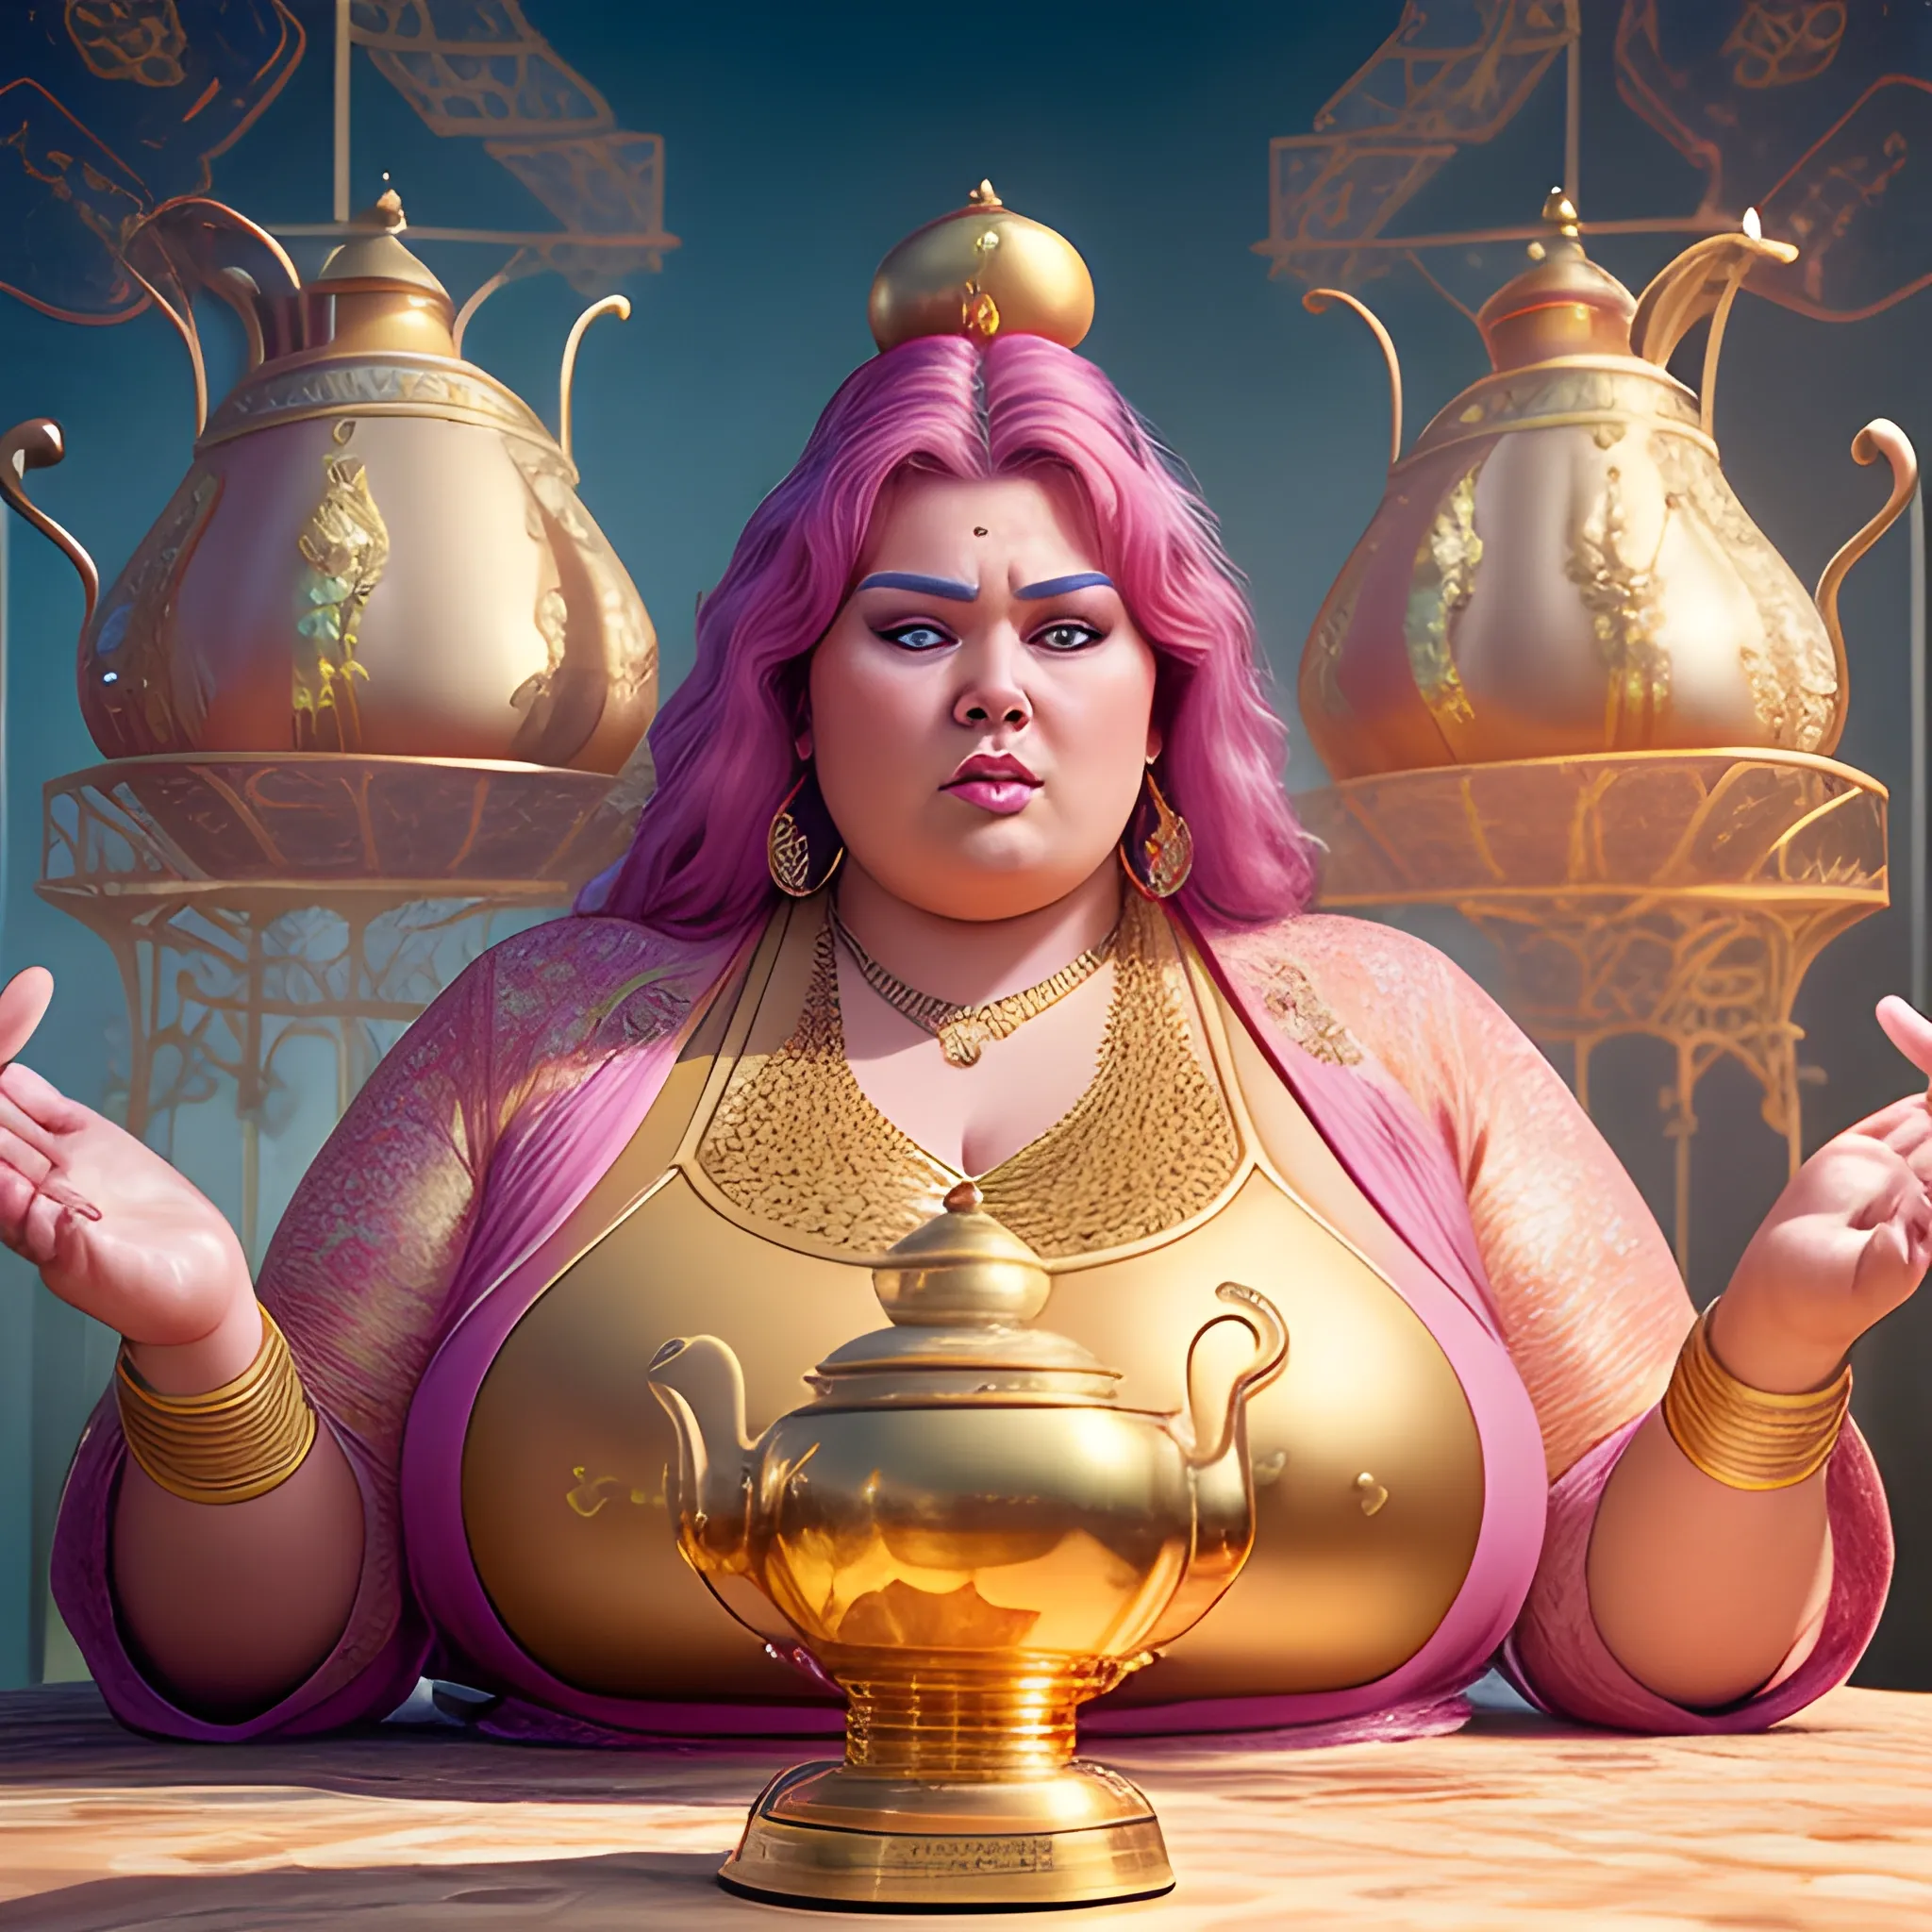  Realistic, high-quality, 8k, extremely detailed photography, high detail photography, big beautiful, adult woman, plus size, gigantic, towering height, female genie being summoned from her magic golden teapot, she hasn't seen a person in centuries, genie cuffs and jewelry,